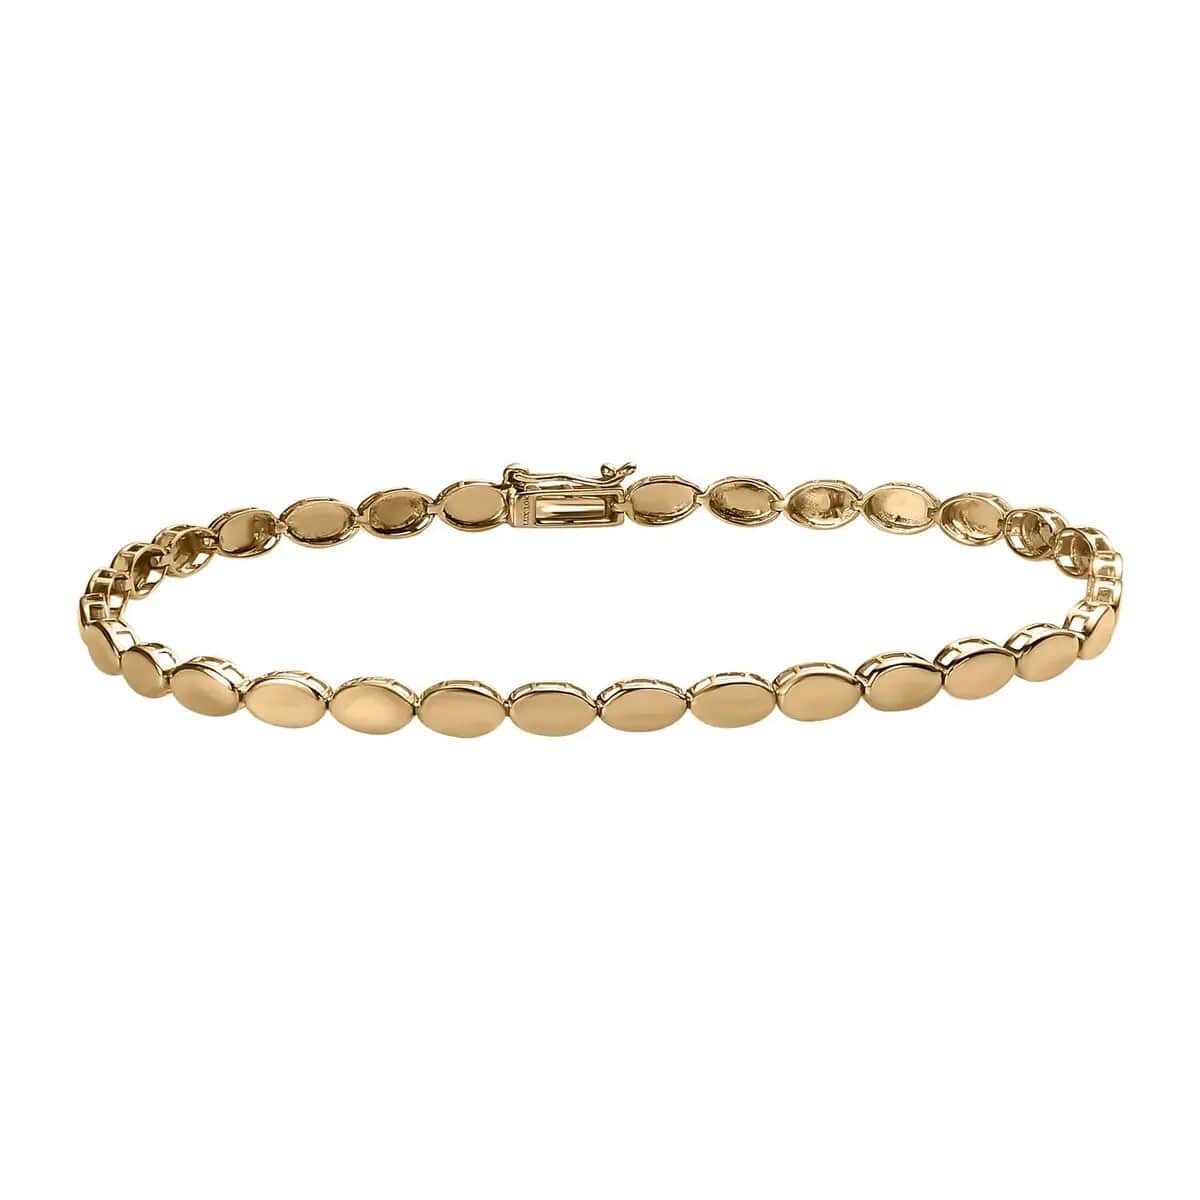 Luxoro 10K Yellow Gold Bracelet,  Oval Link Bracelet, Gold Link Bracelet, Gold Bracelet For Her, Gold Jewelry For Her (6.50 In) 3.50 Grams image number 0